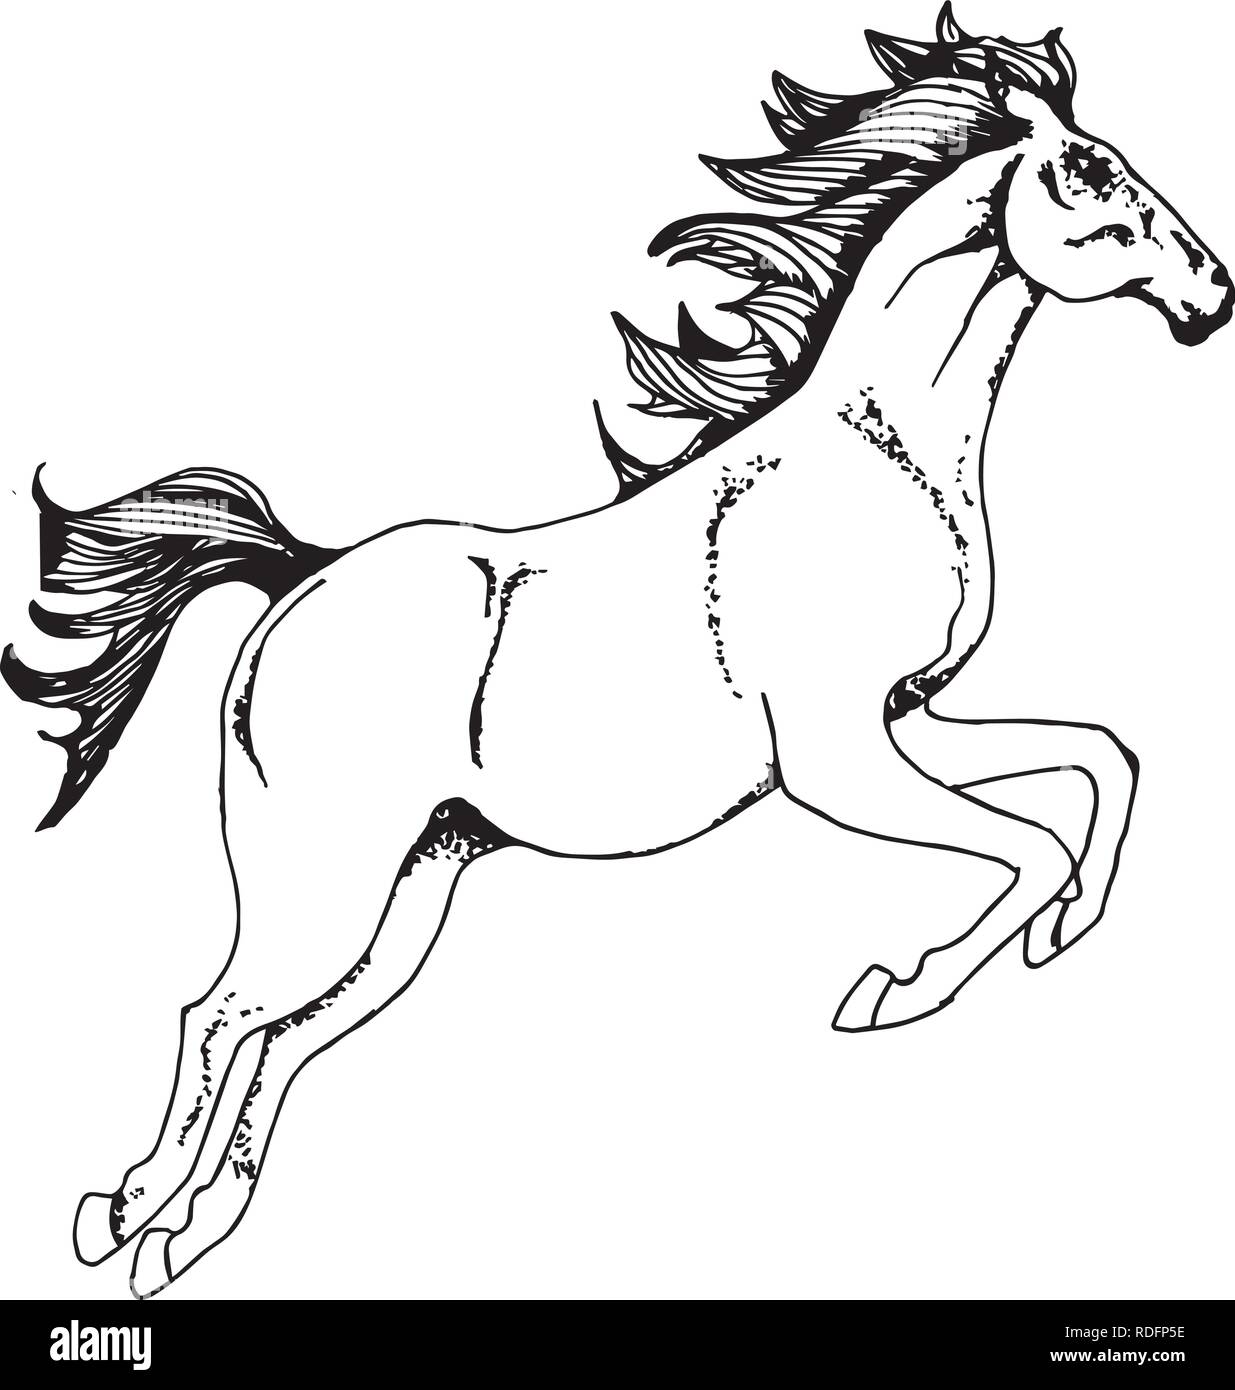 Running Horse Vector On A White Background Outline Drawing Horses Arabian  Horses In Native Costume Indian Totem Tattoo Design Hand Drawn Picture Running  Horse Tattoo Hand Drawn Horse Sketch Royalty Free SVG